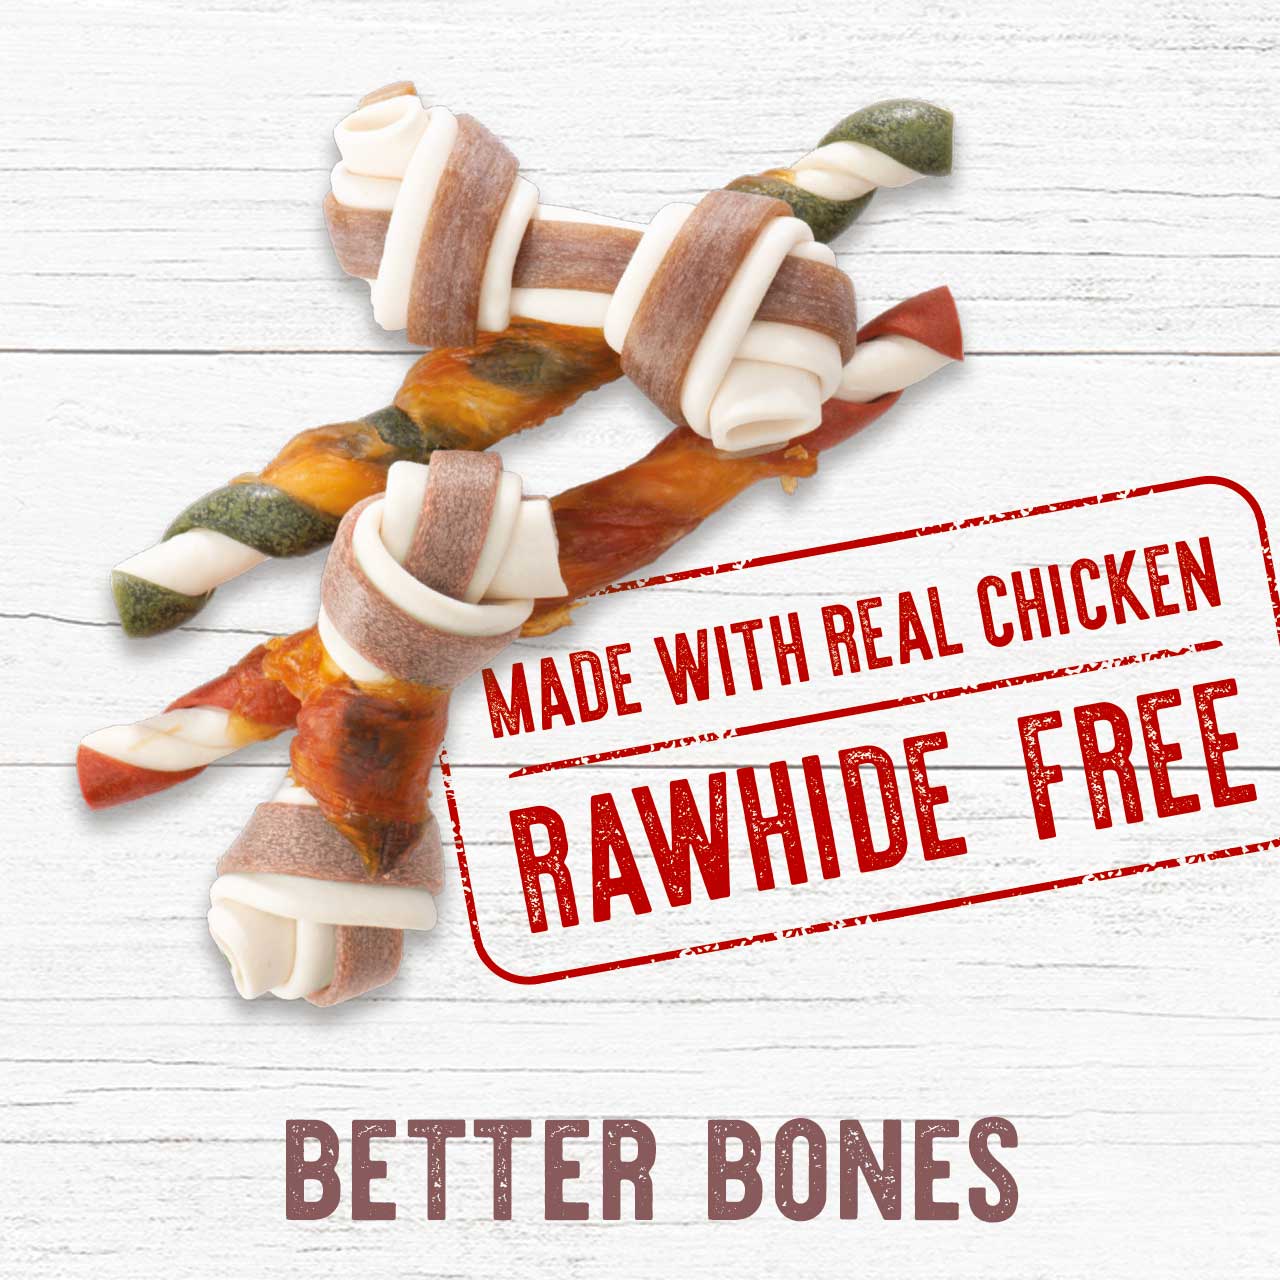 Better Bones - made with real chicken, rawhide free